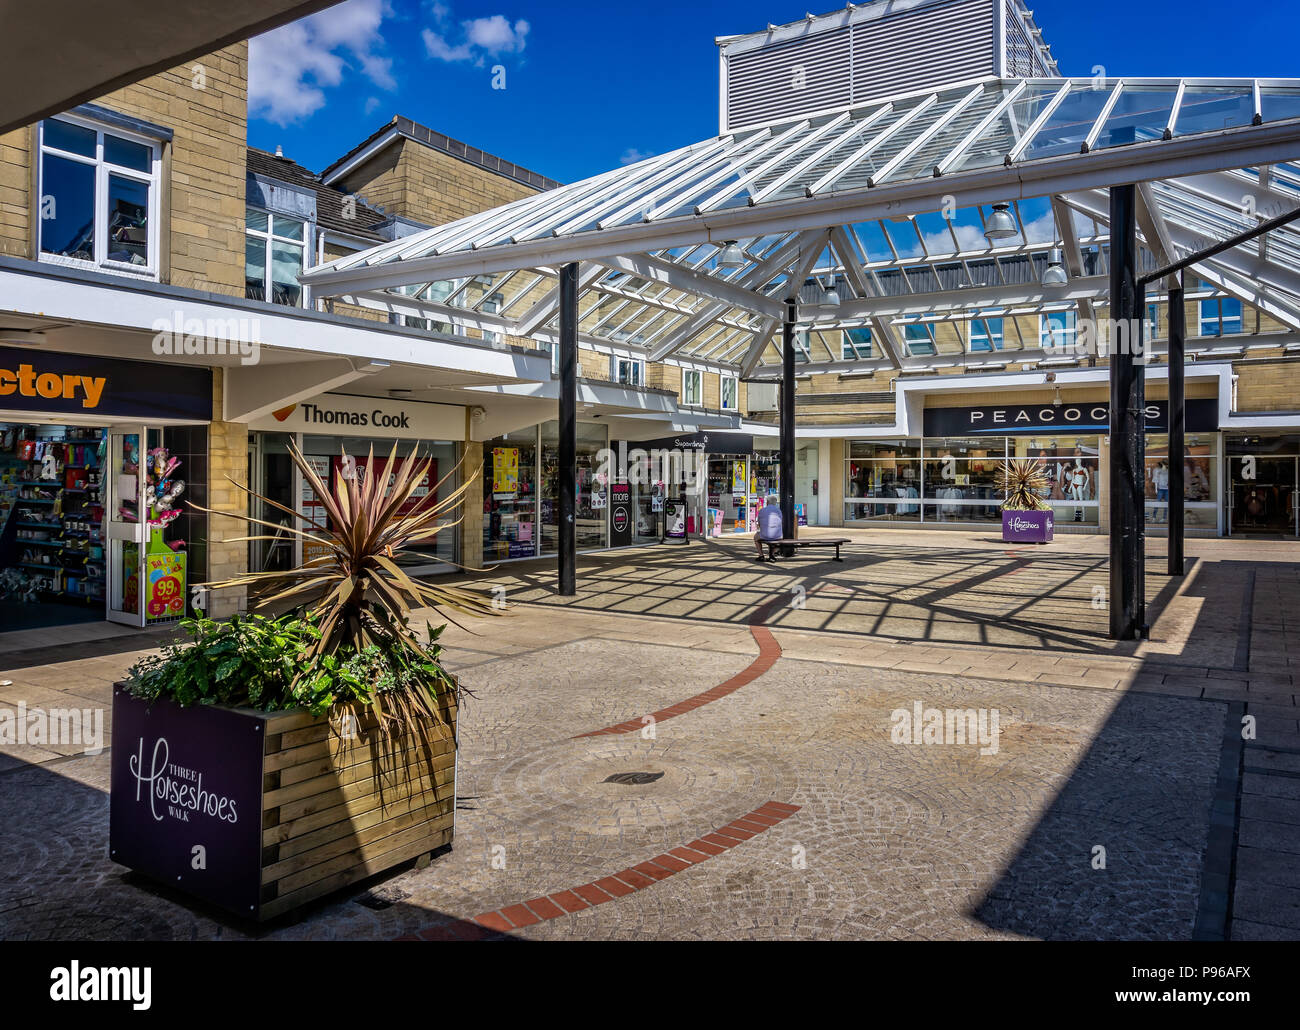 Three Horseshoes Walk Shopping Centre in Warminster, Wiltshire, UK taken on 15 July 2018 Stock Photo